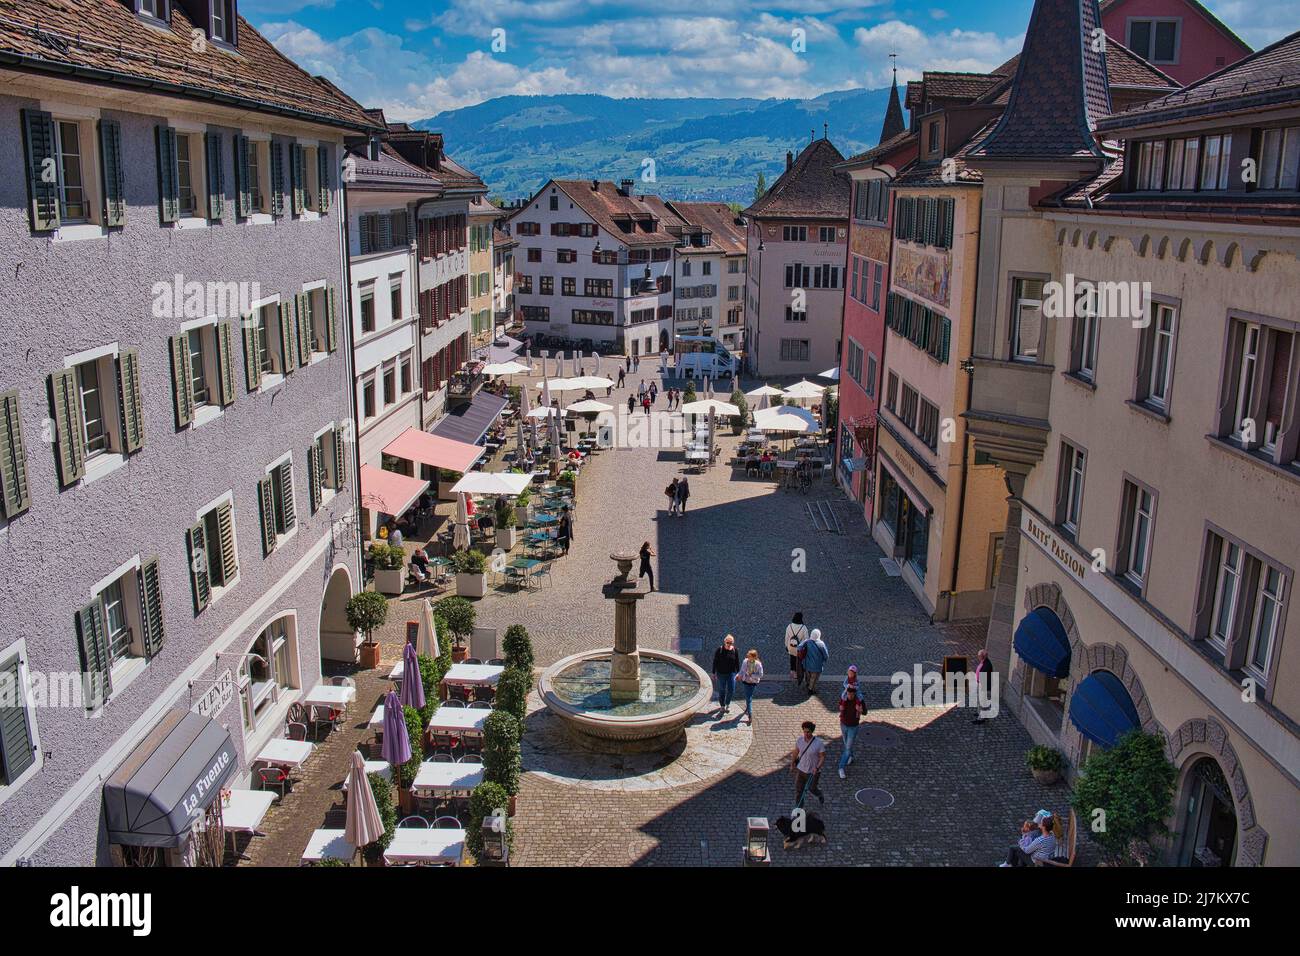 HAUPTPLATZ OVERVIEW WITH MOUNTAINS IN BACKGROUND, RAPPERSWIL, SWITZERLAND Stock Photo